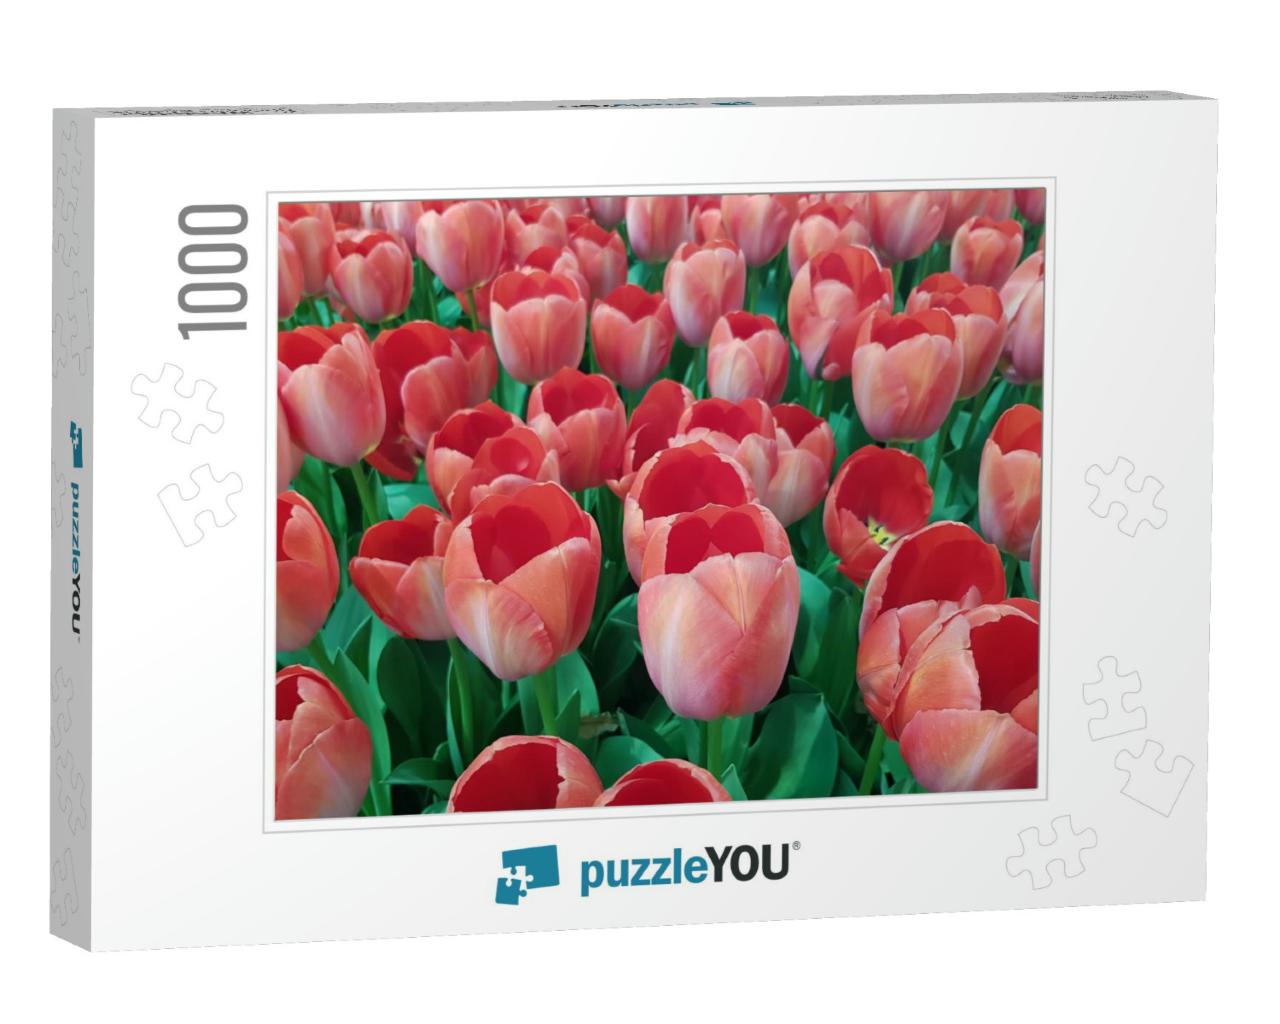 Peach Tulips Against Green Foliage Background. Peach Tuli... Jigsaw Puzzle with 1000 pieces